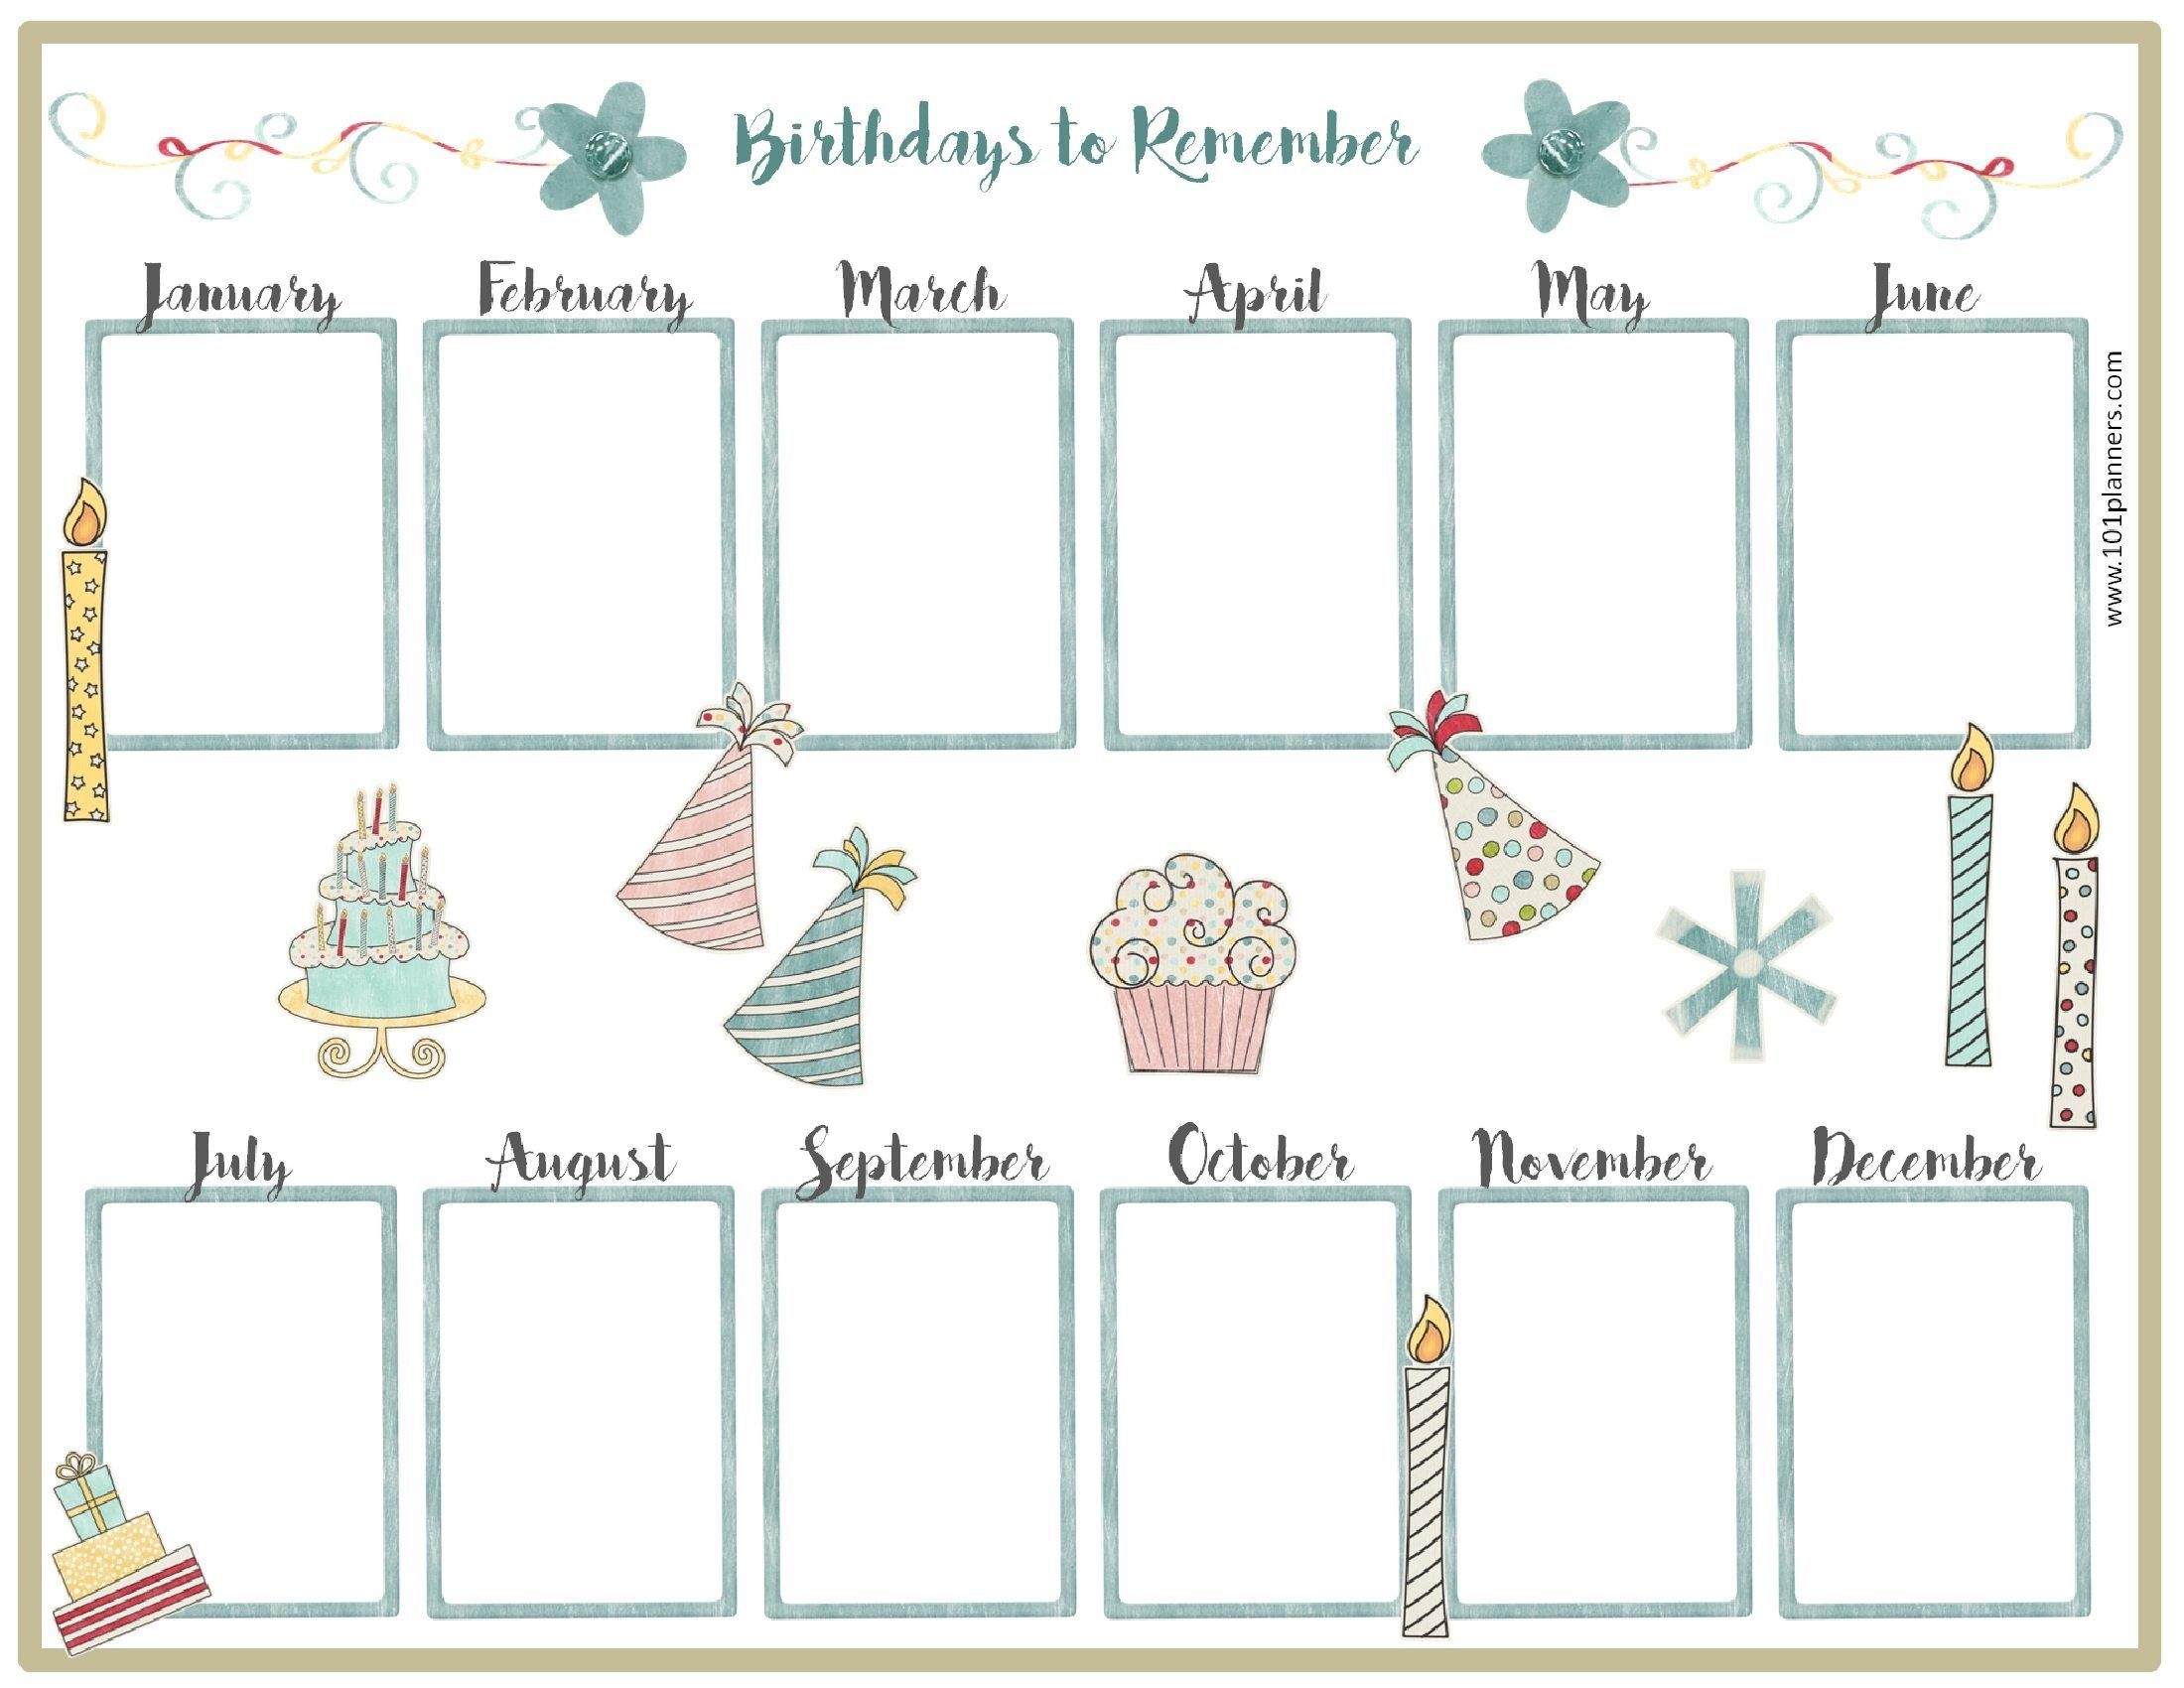 Birthday Calendar Template (With Images) | Family Birthday